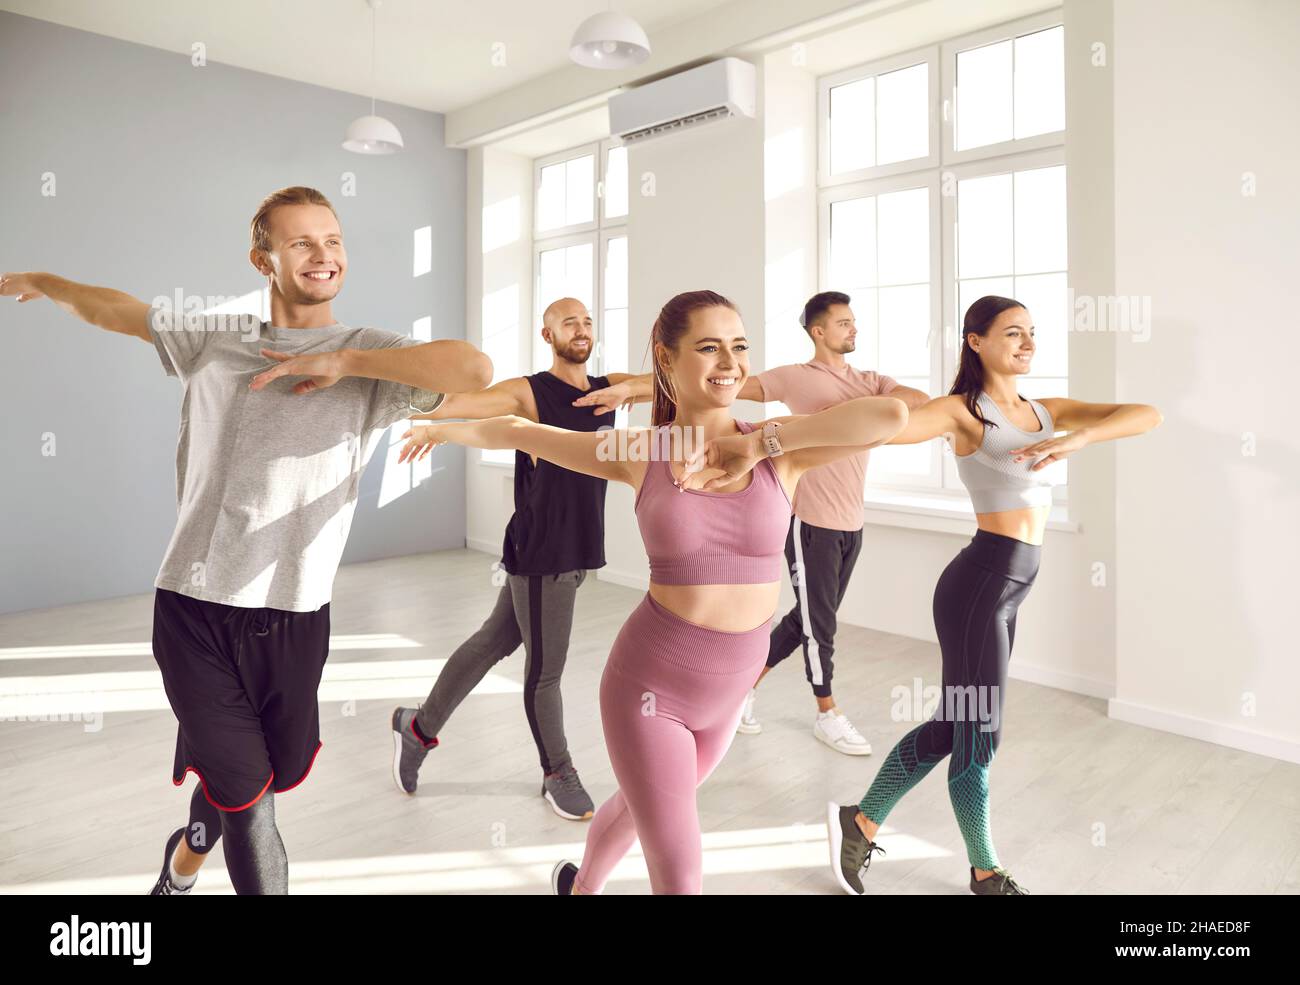 Group of happy, smiling young people having dance fitness workout with instructor Stock Photo